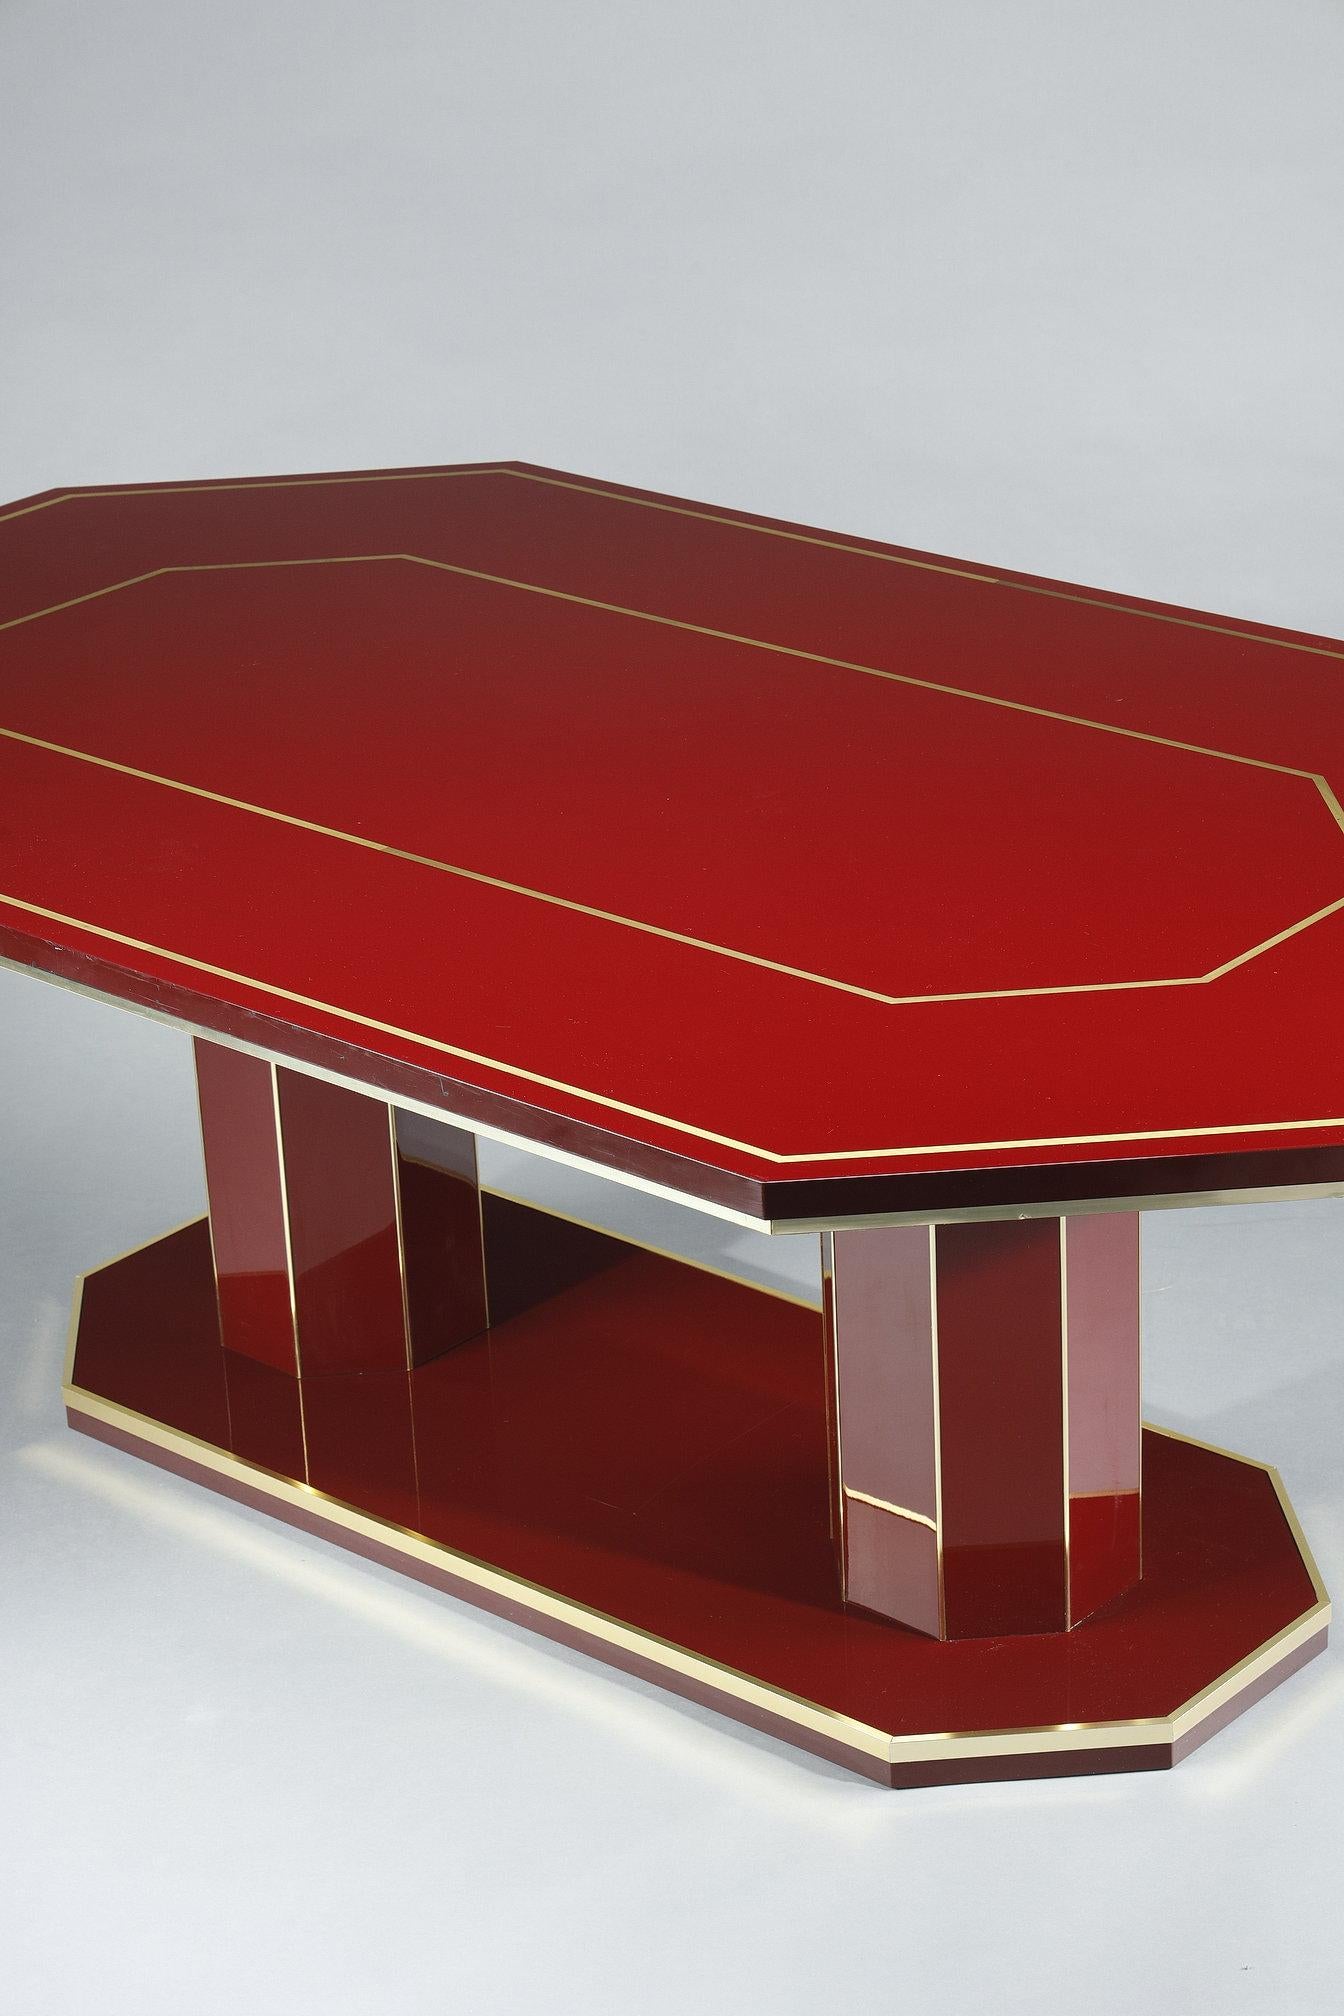 Late 20th Century Dining table in lacquered wood and gilded brass, Designed by Paco Rabanne